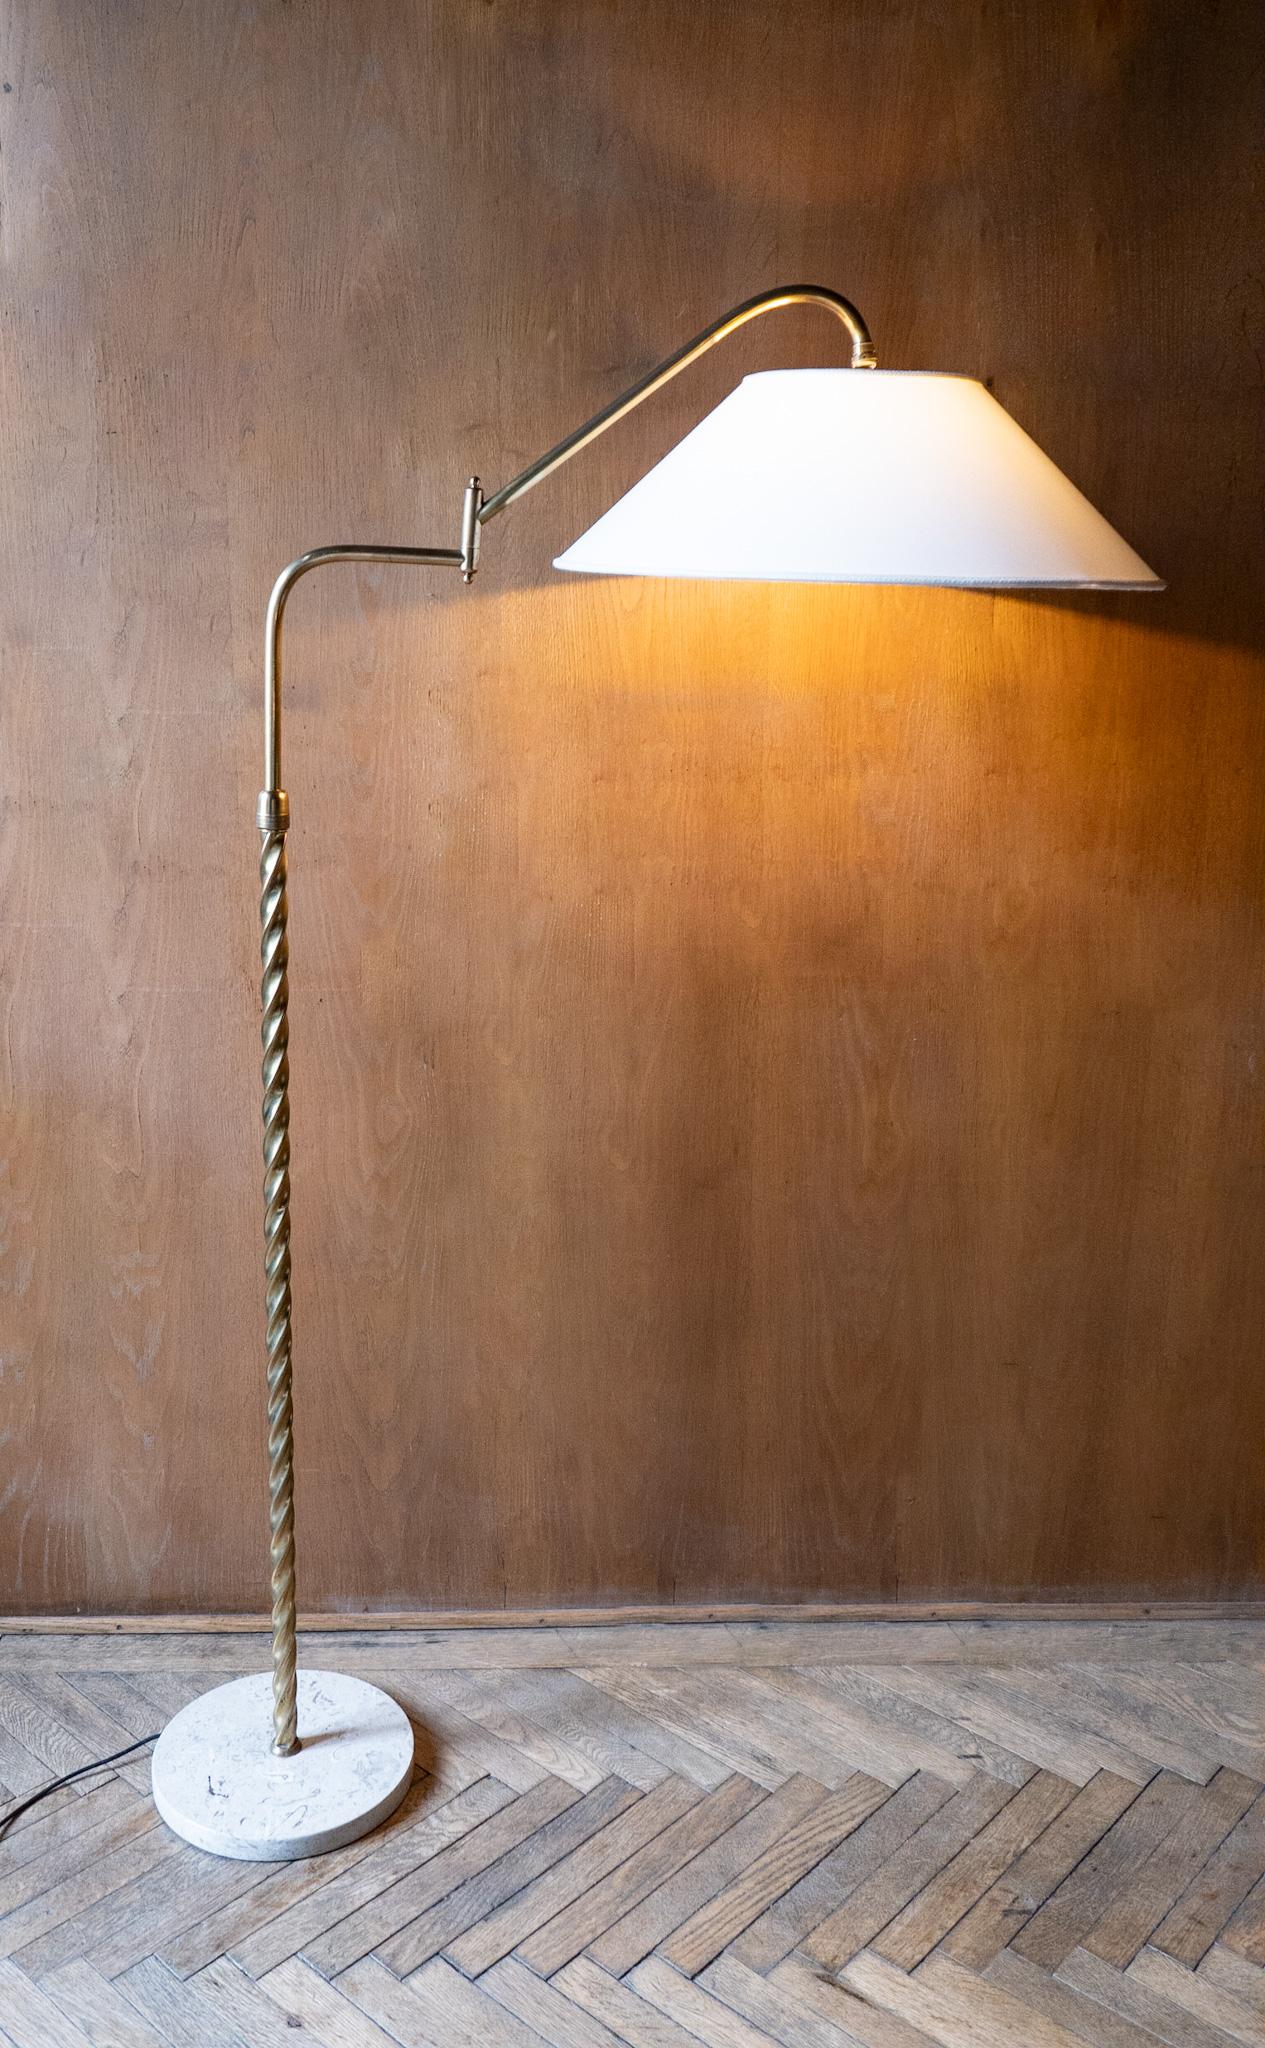 Mid Century Modern Brass Marble Adjustable Arm Floor Lamp, Italy 1950s.

Experience the timeless allure of Italian design with this exquisite floor lamp from the 1950s, Crafted with unparalleled artistry, this lamp stands as a testament to the